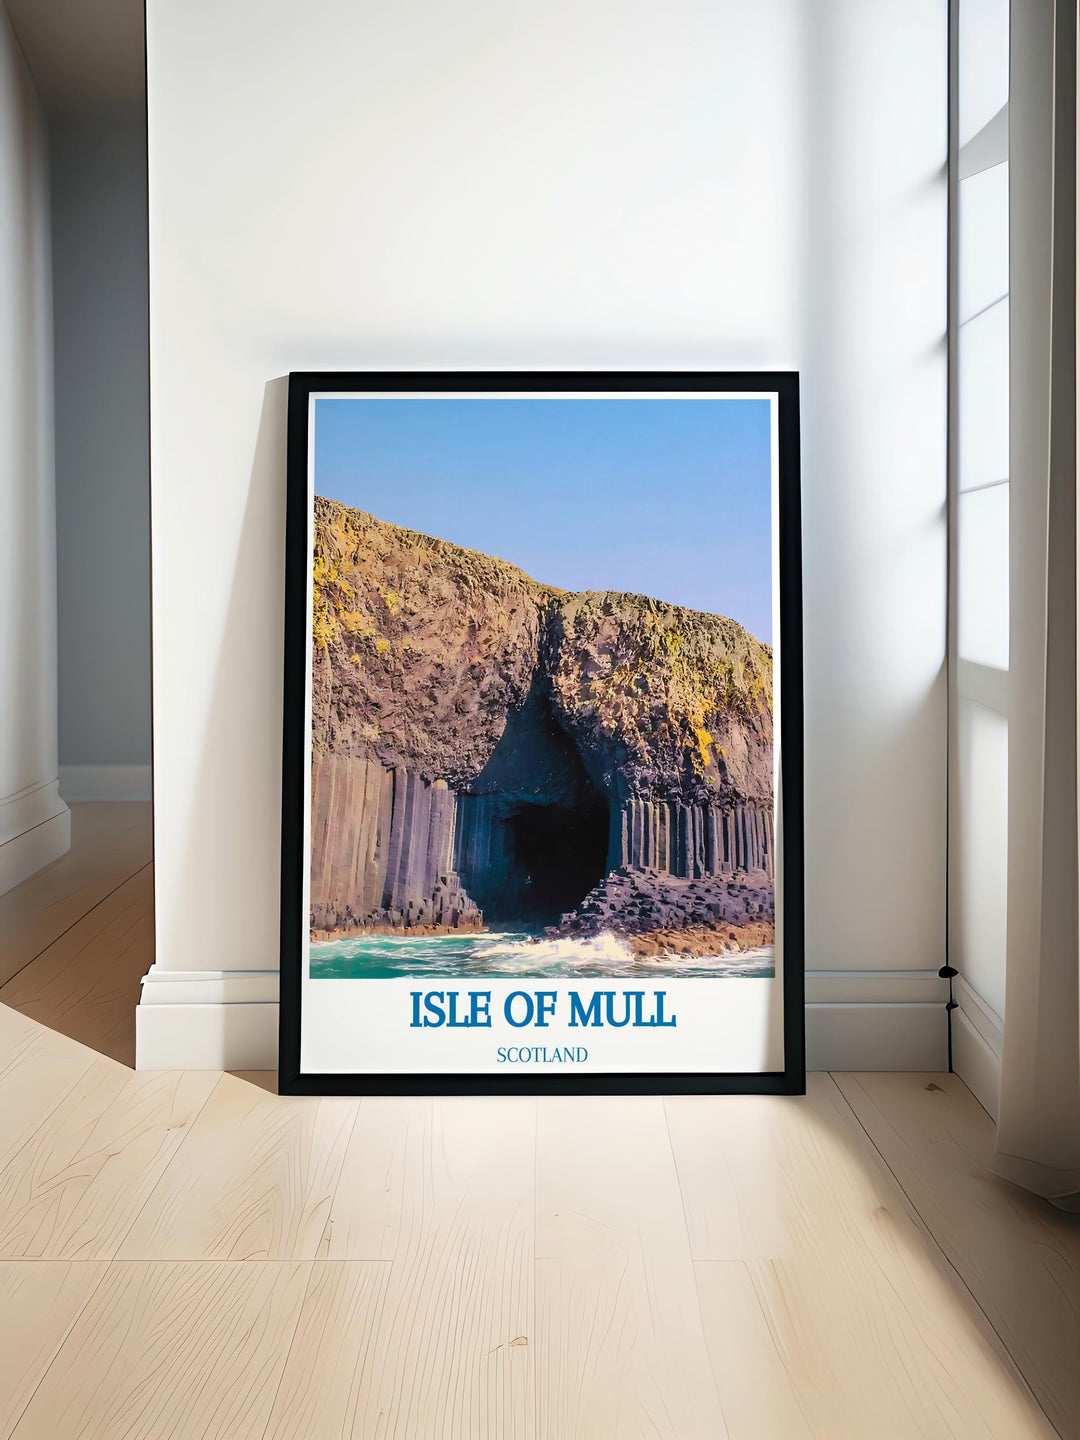 Art print of the Isle of Mull showcasing its rugged landscapes and serene coastlines perfect for any lover of Scottish scenery